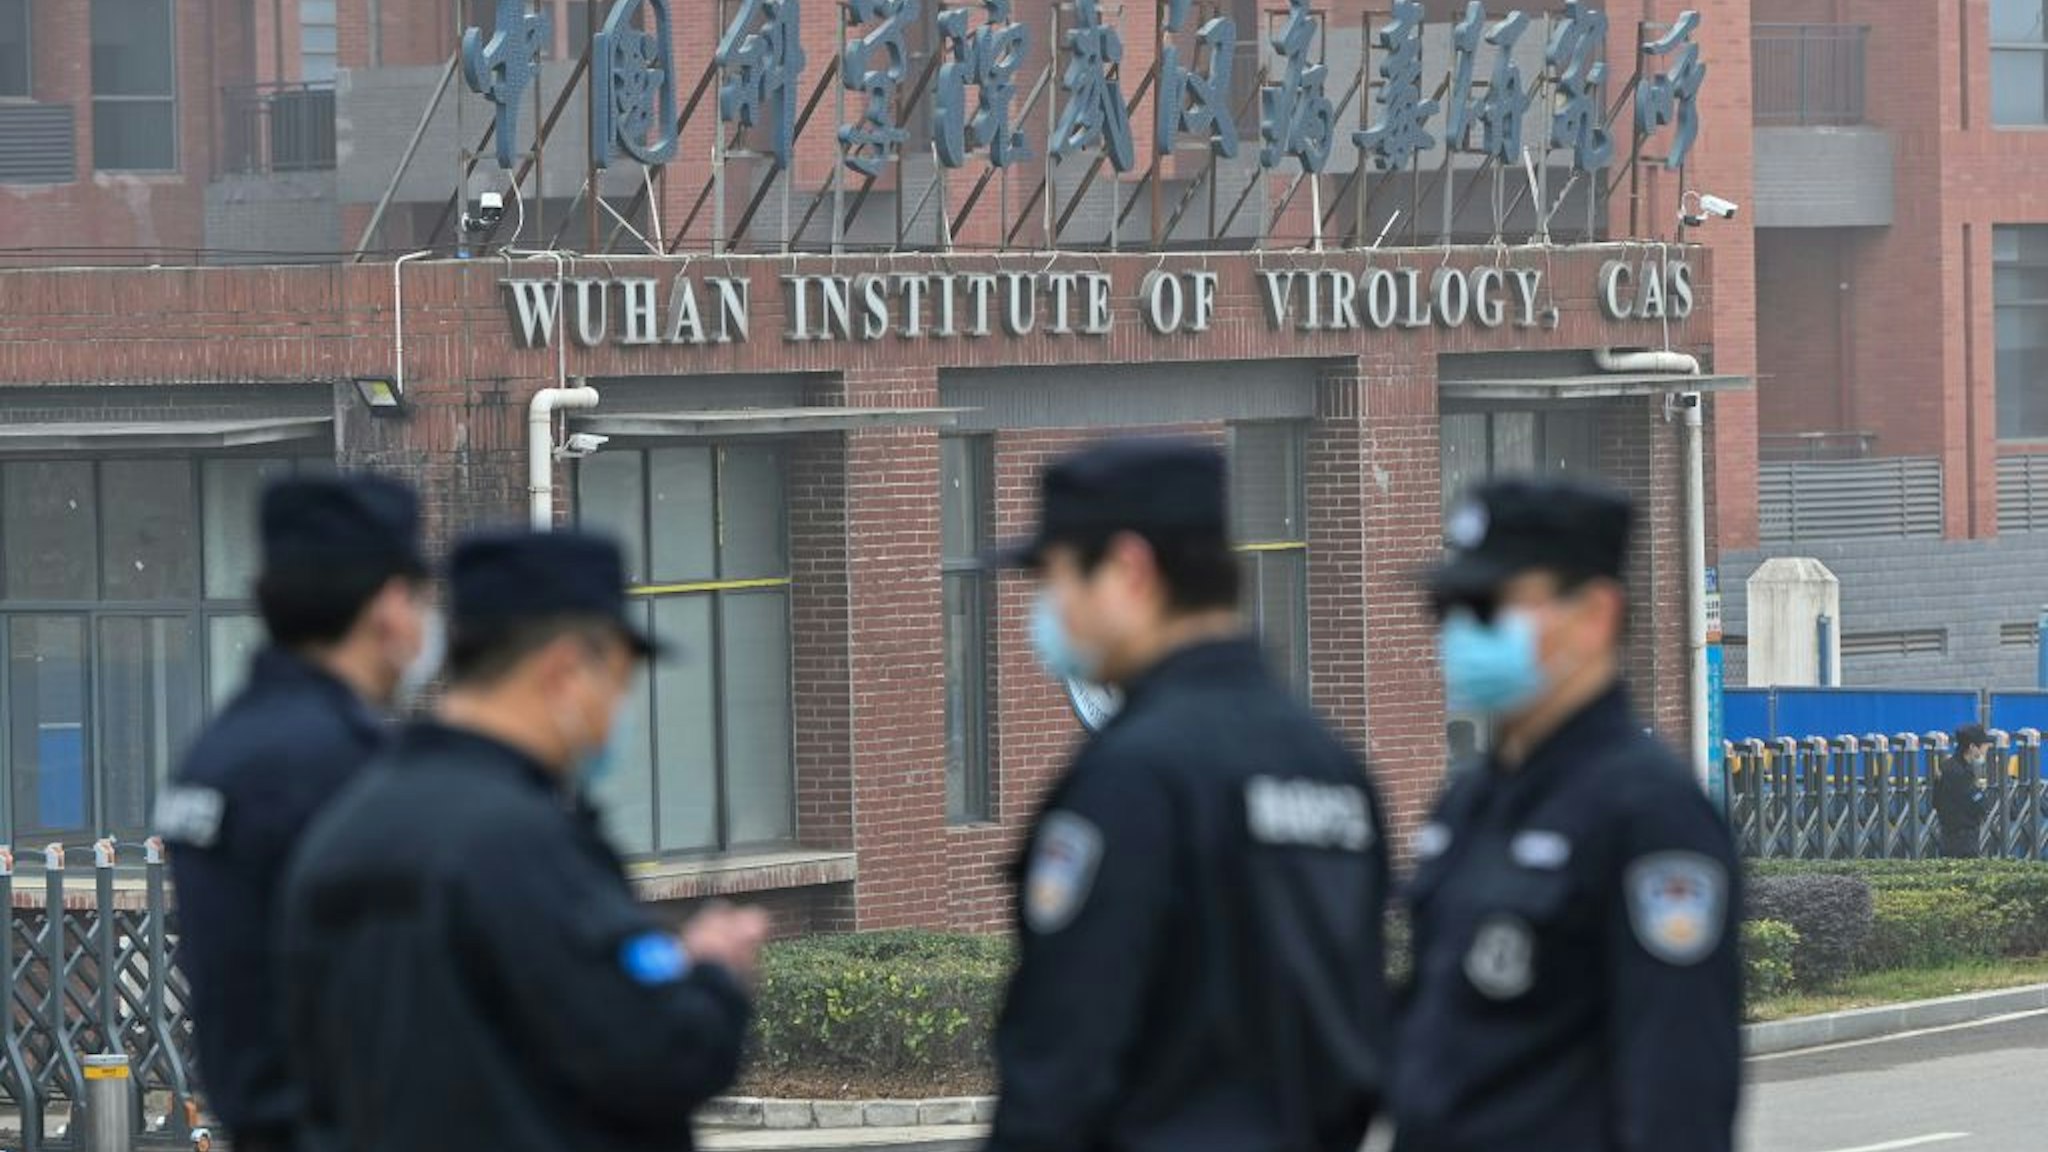 Security personnel stand guard outside the Wuhan Institute of Virology in Wuhan as members of the World Health Organization (WHO) team investigating the origins of the COVID-19 coronavirus make a visit to the institute in Wuhan in China's central Hubei province on February 3, 2021. (Photo by Hector RETAMAL / AFP)